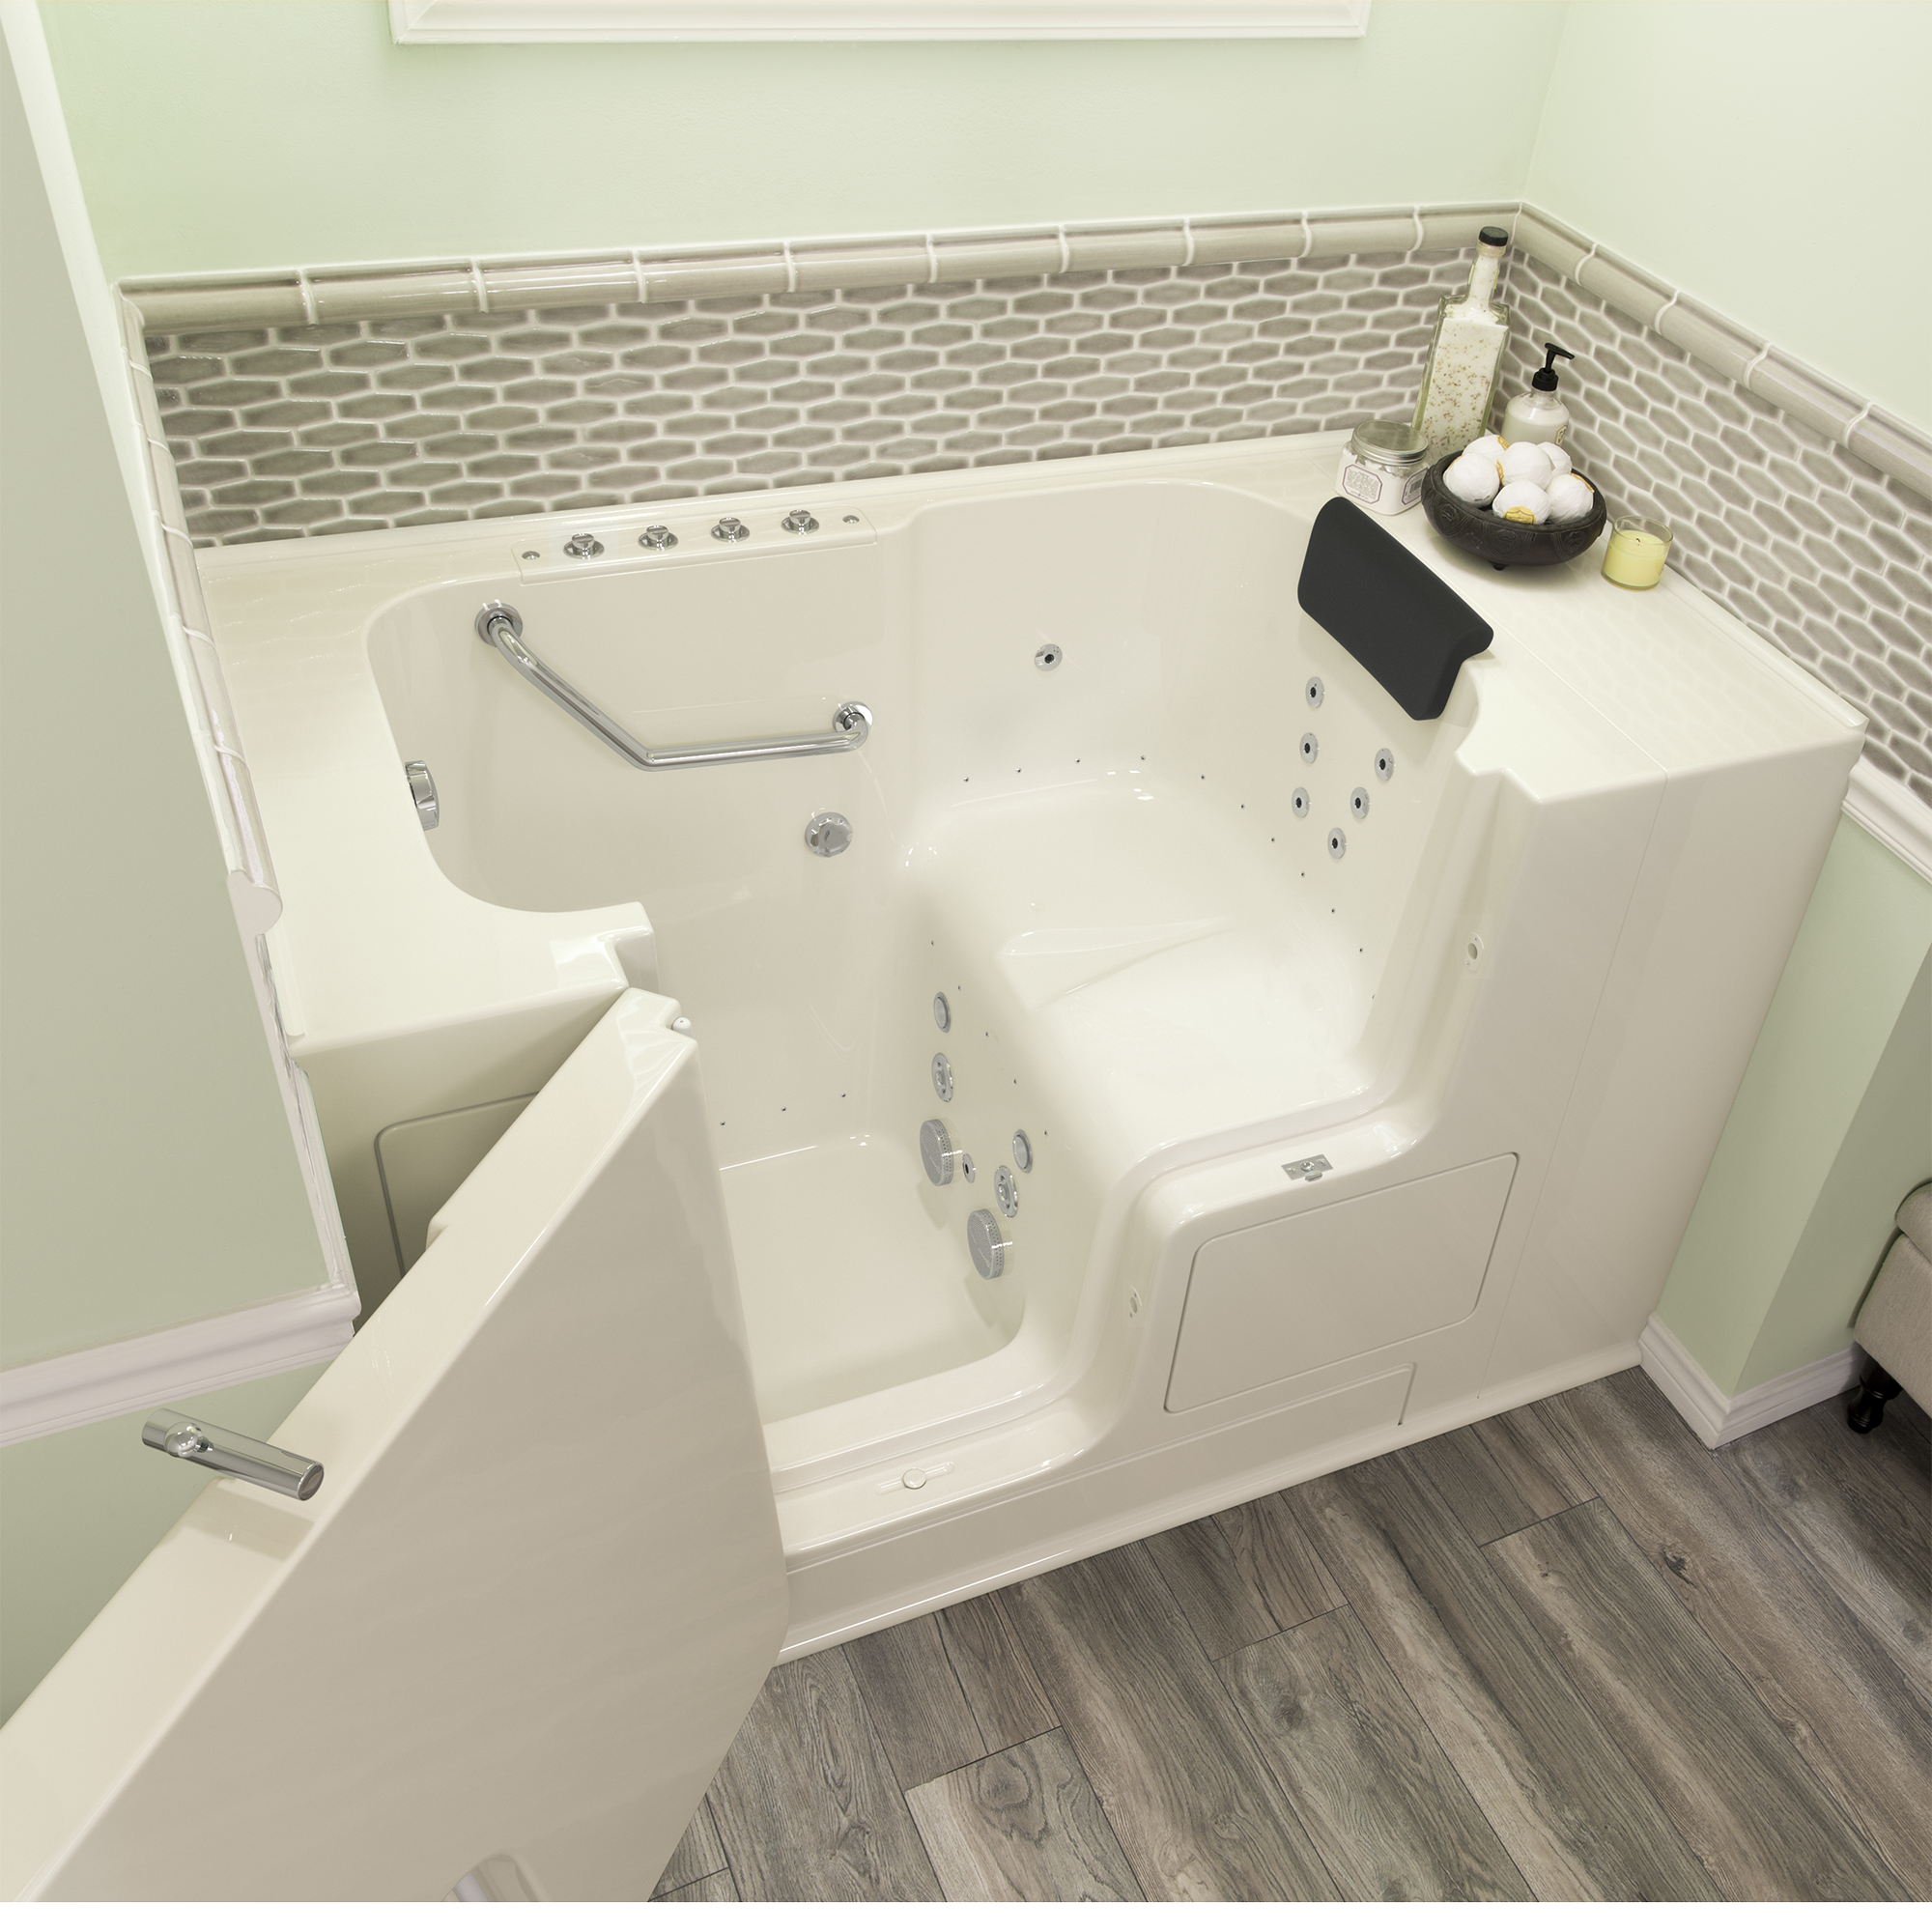 Gelcoat Premium Series 32 x 52 -Inch Walk-in Tub With Combination Air Spa and Whirlpool Systems - Left-Hand Drain